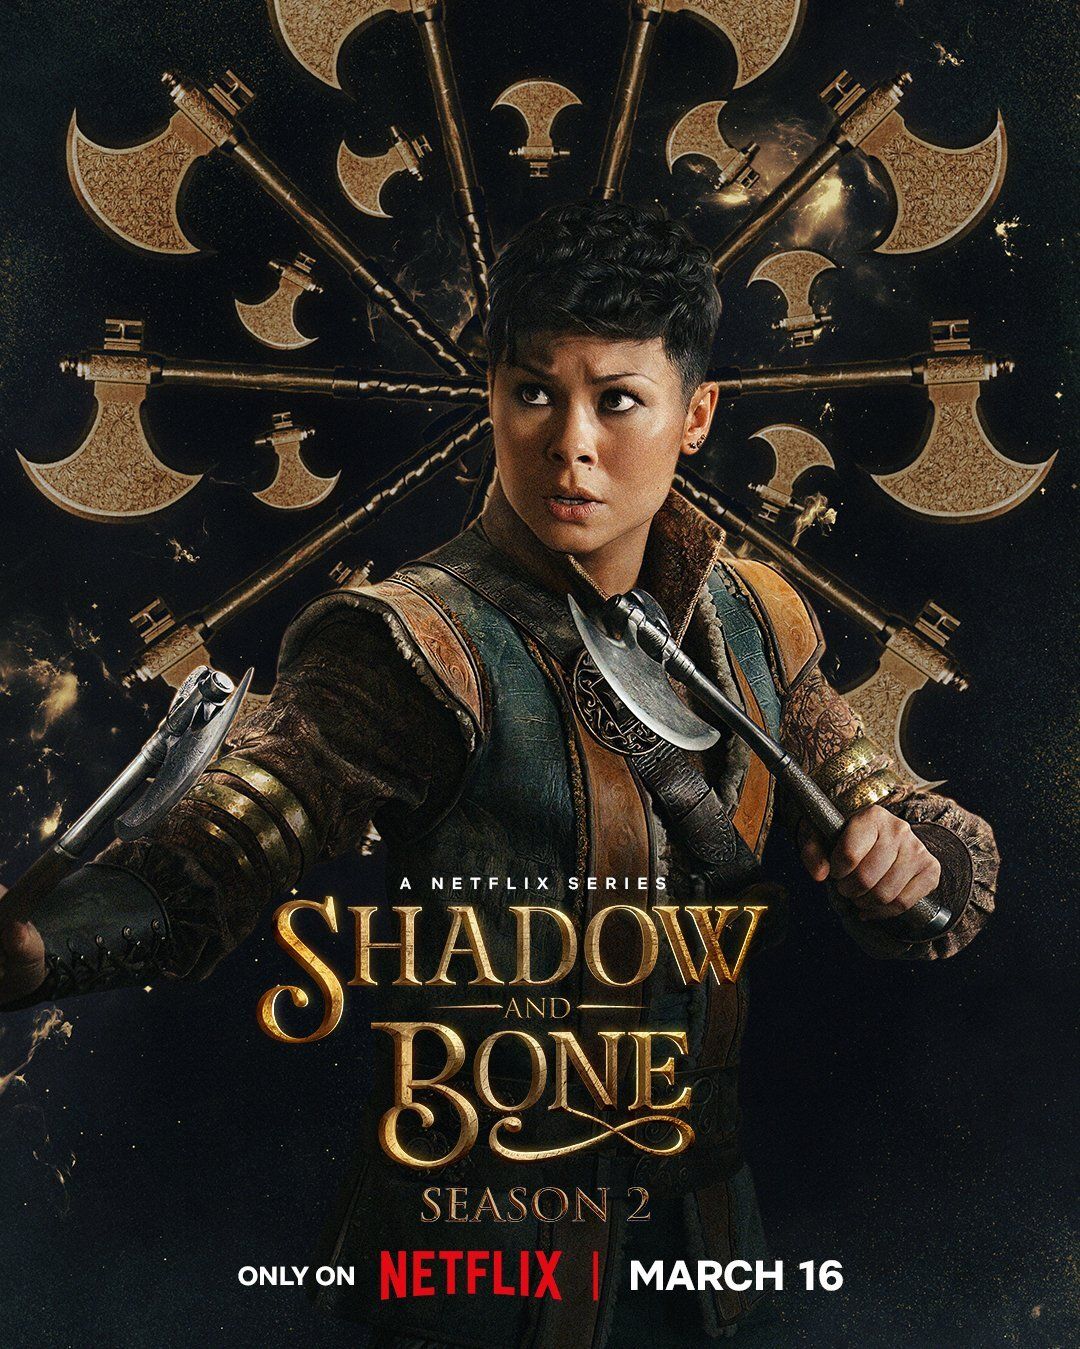 Anna Leong Brophy as Tamar in Shadow and Bone Season 2 Character Poster